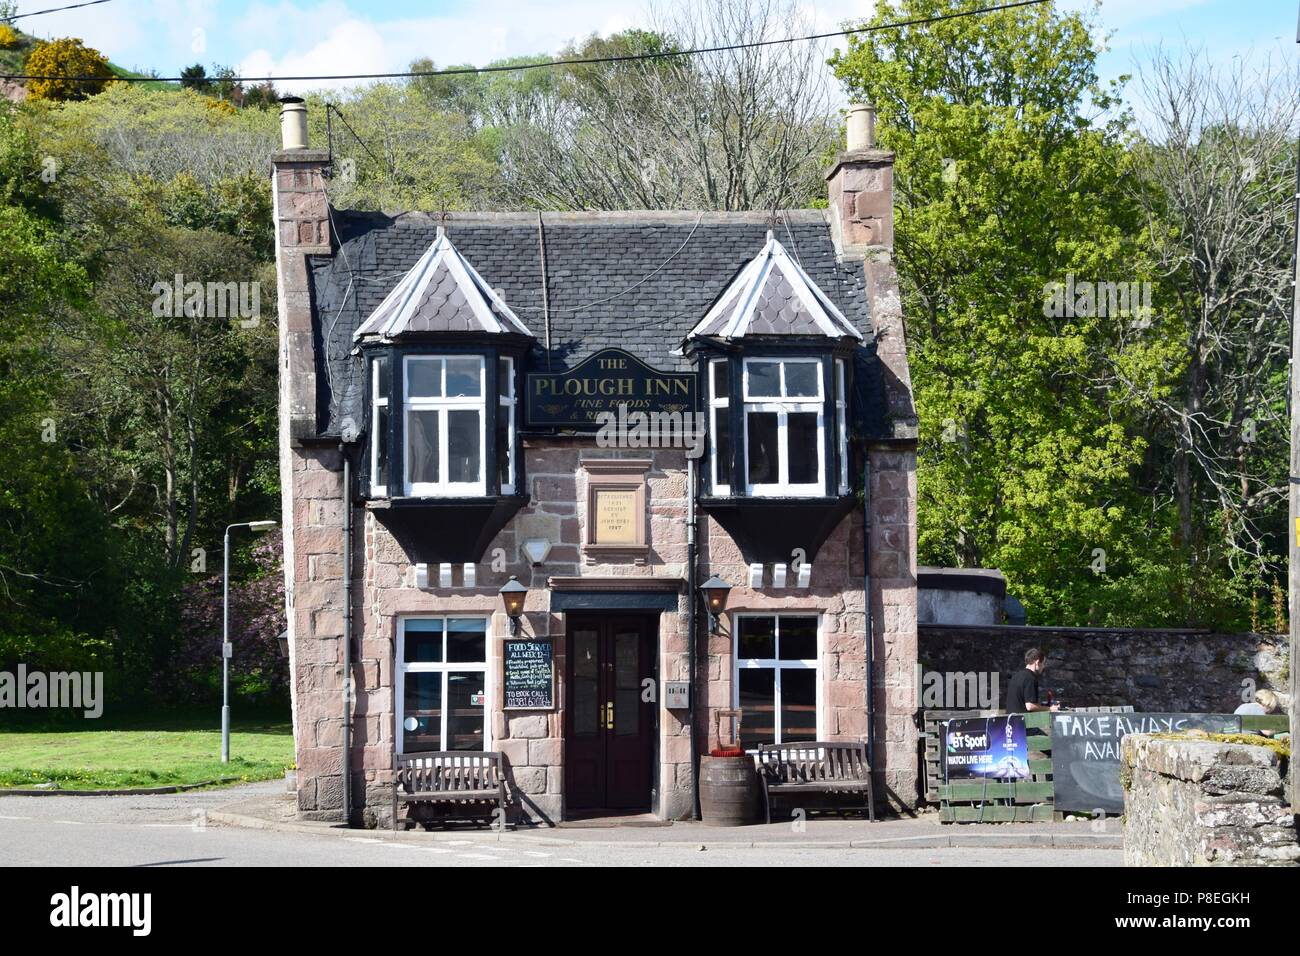 Plough Inn, Rosemarkie, country pub with crooked gable end. Stock Photo